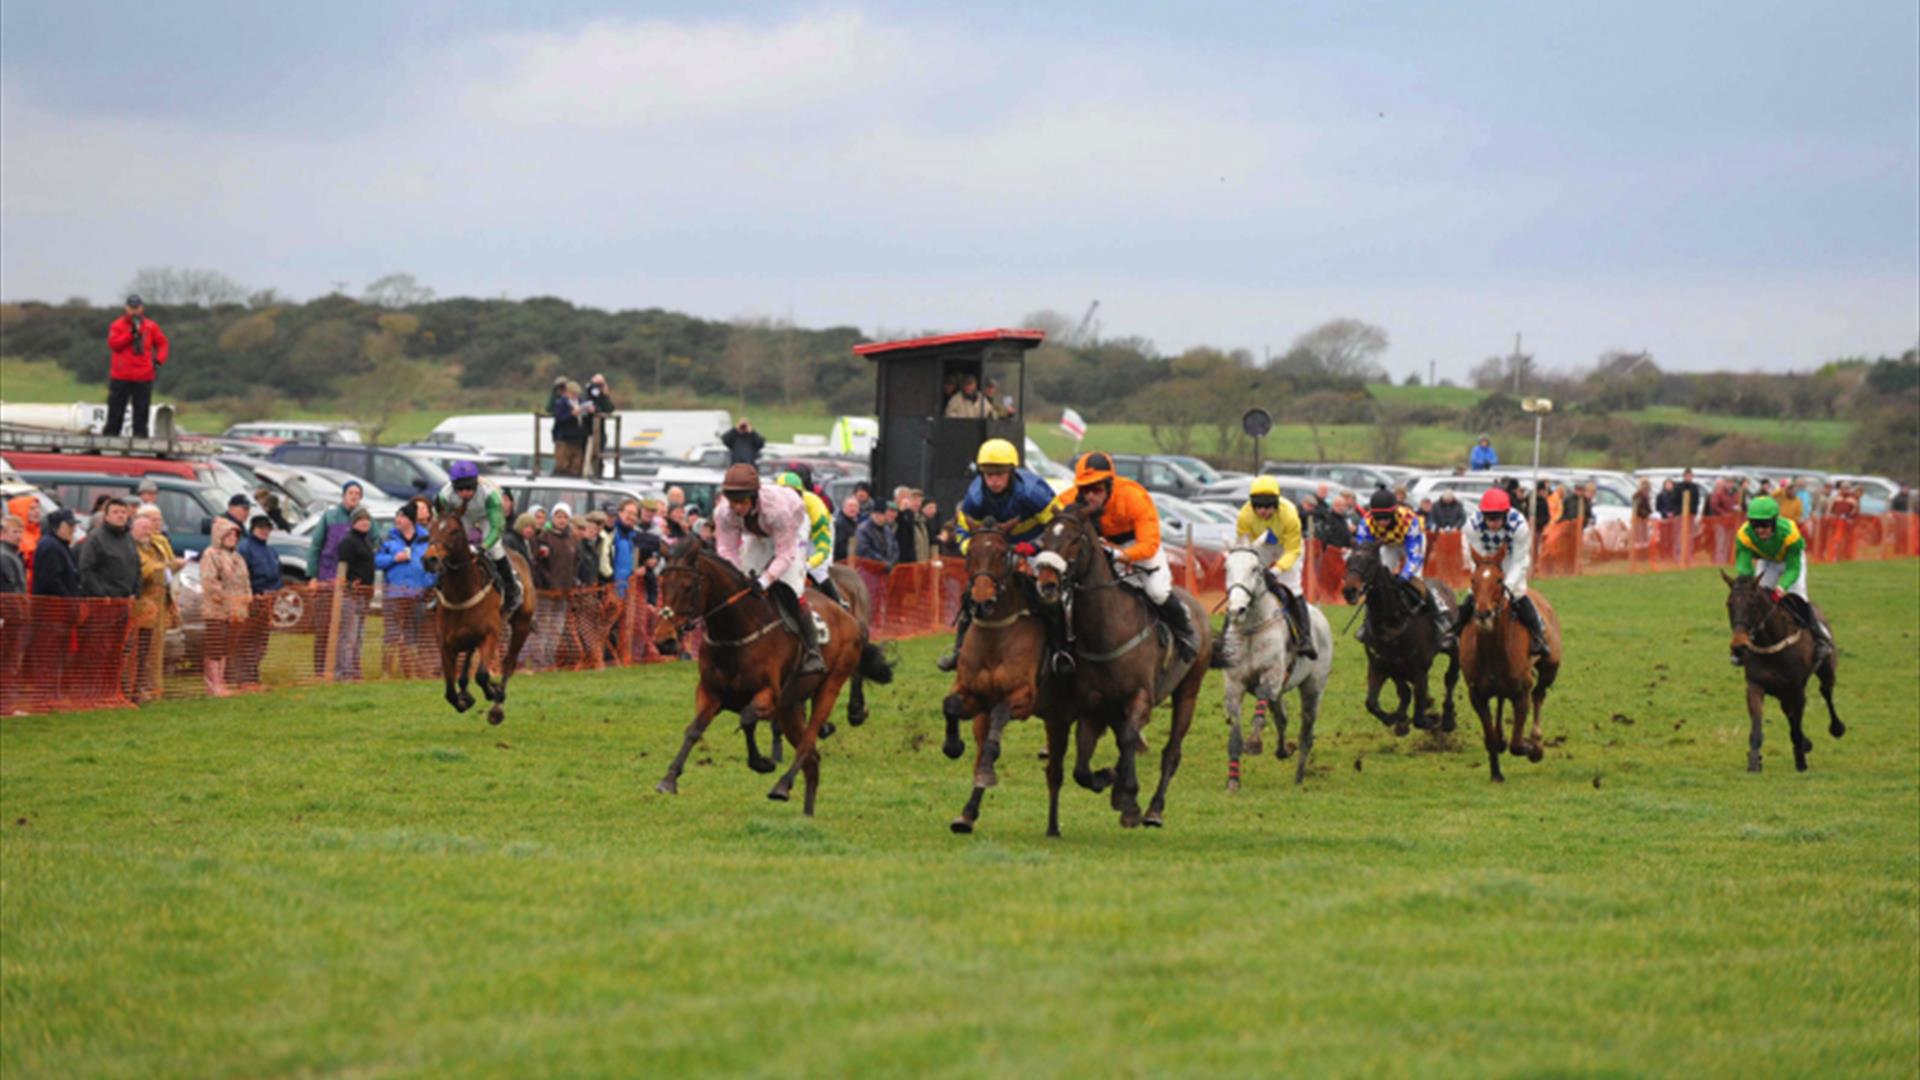 A horse race in action